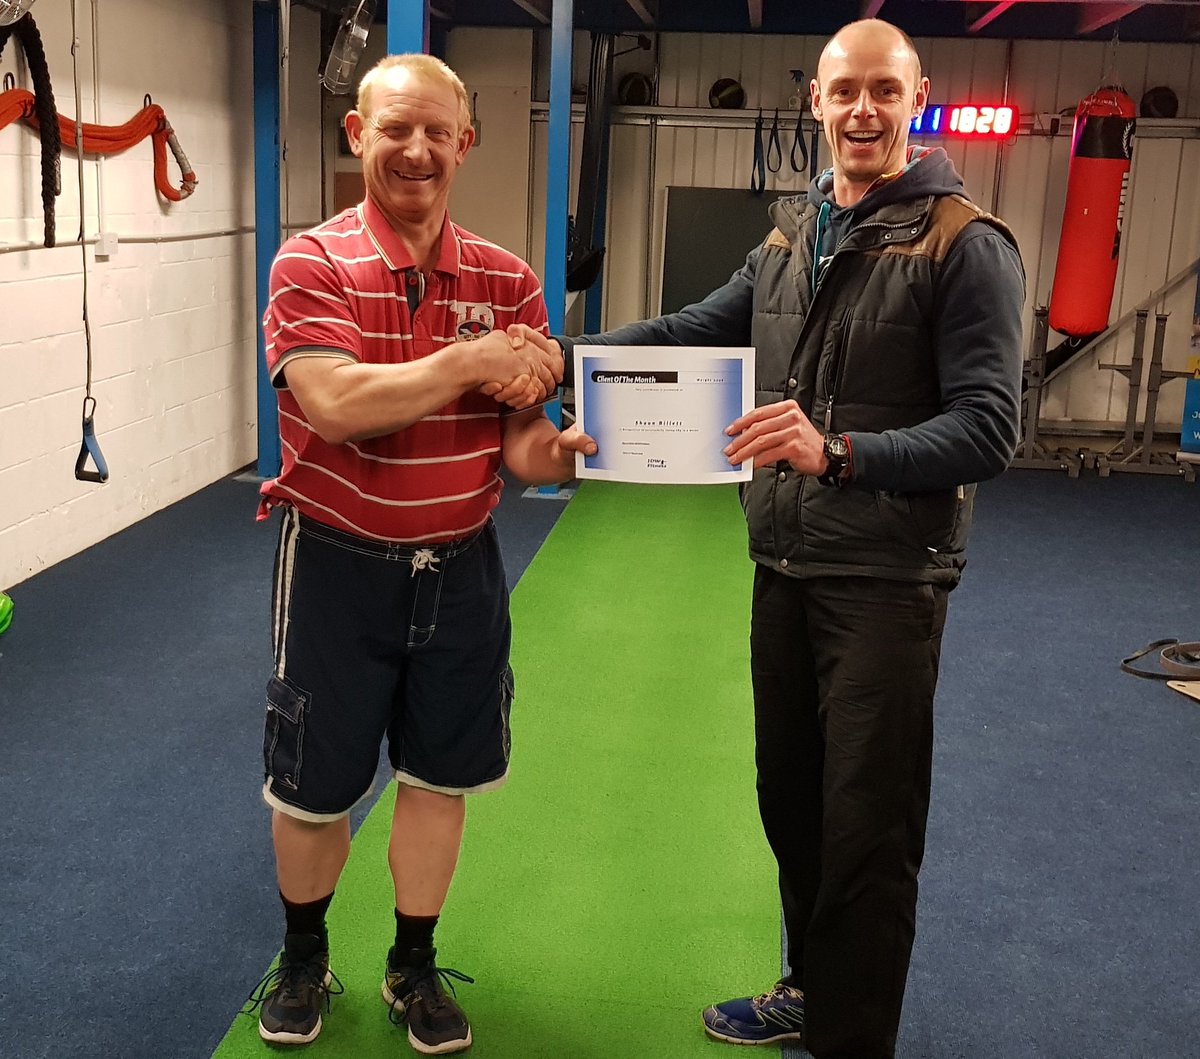 Client of the month Shaun Billett, focused on fitness, lost 3% body fat- 6kg weight #SaturdayMotivation #fitness #nofaddiets #results #weightlossjourney